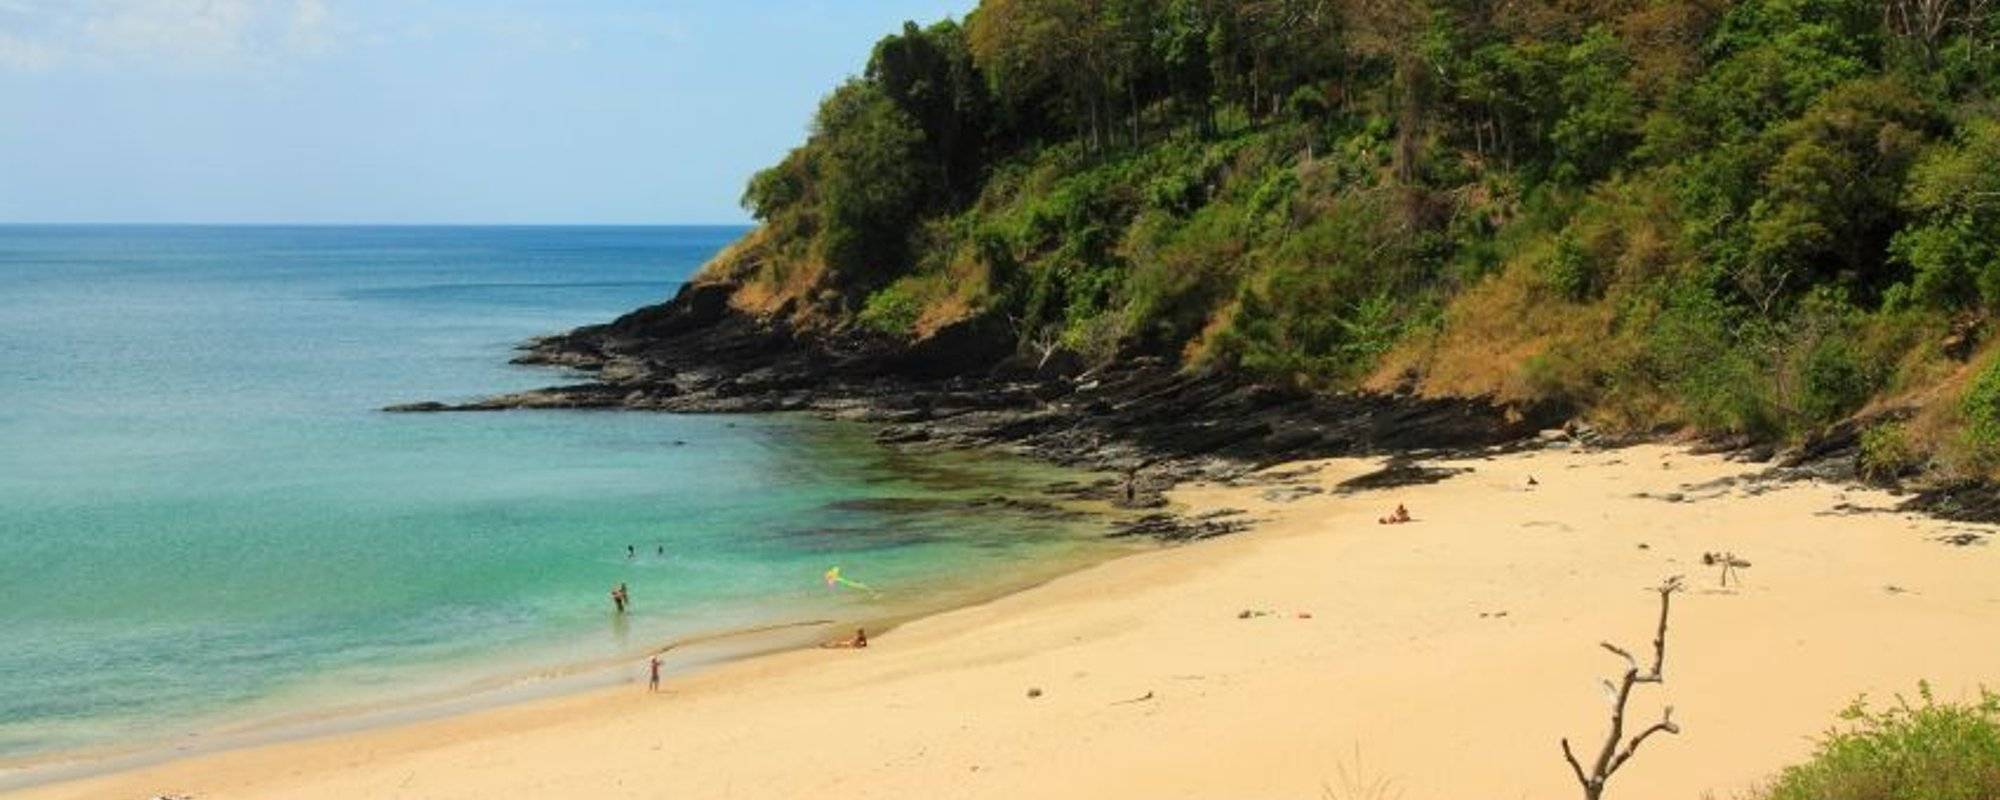 A Relaxing Holiday in Koh Lanta, Thailand